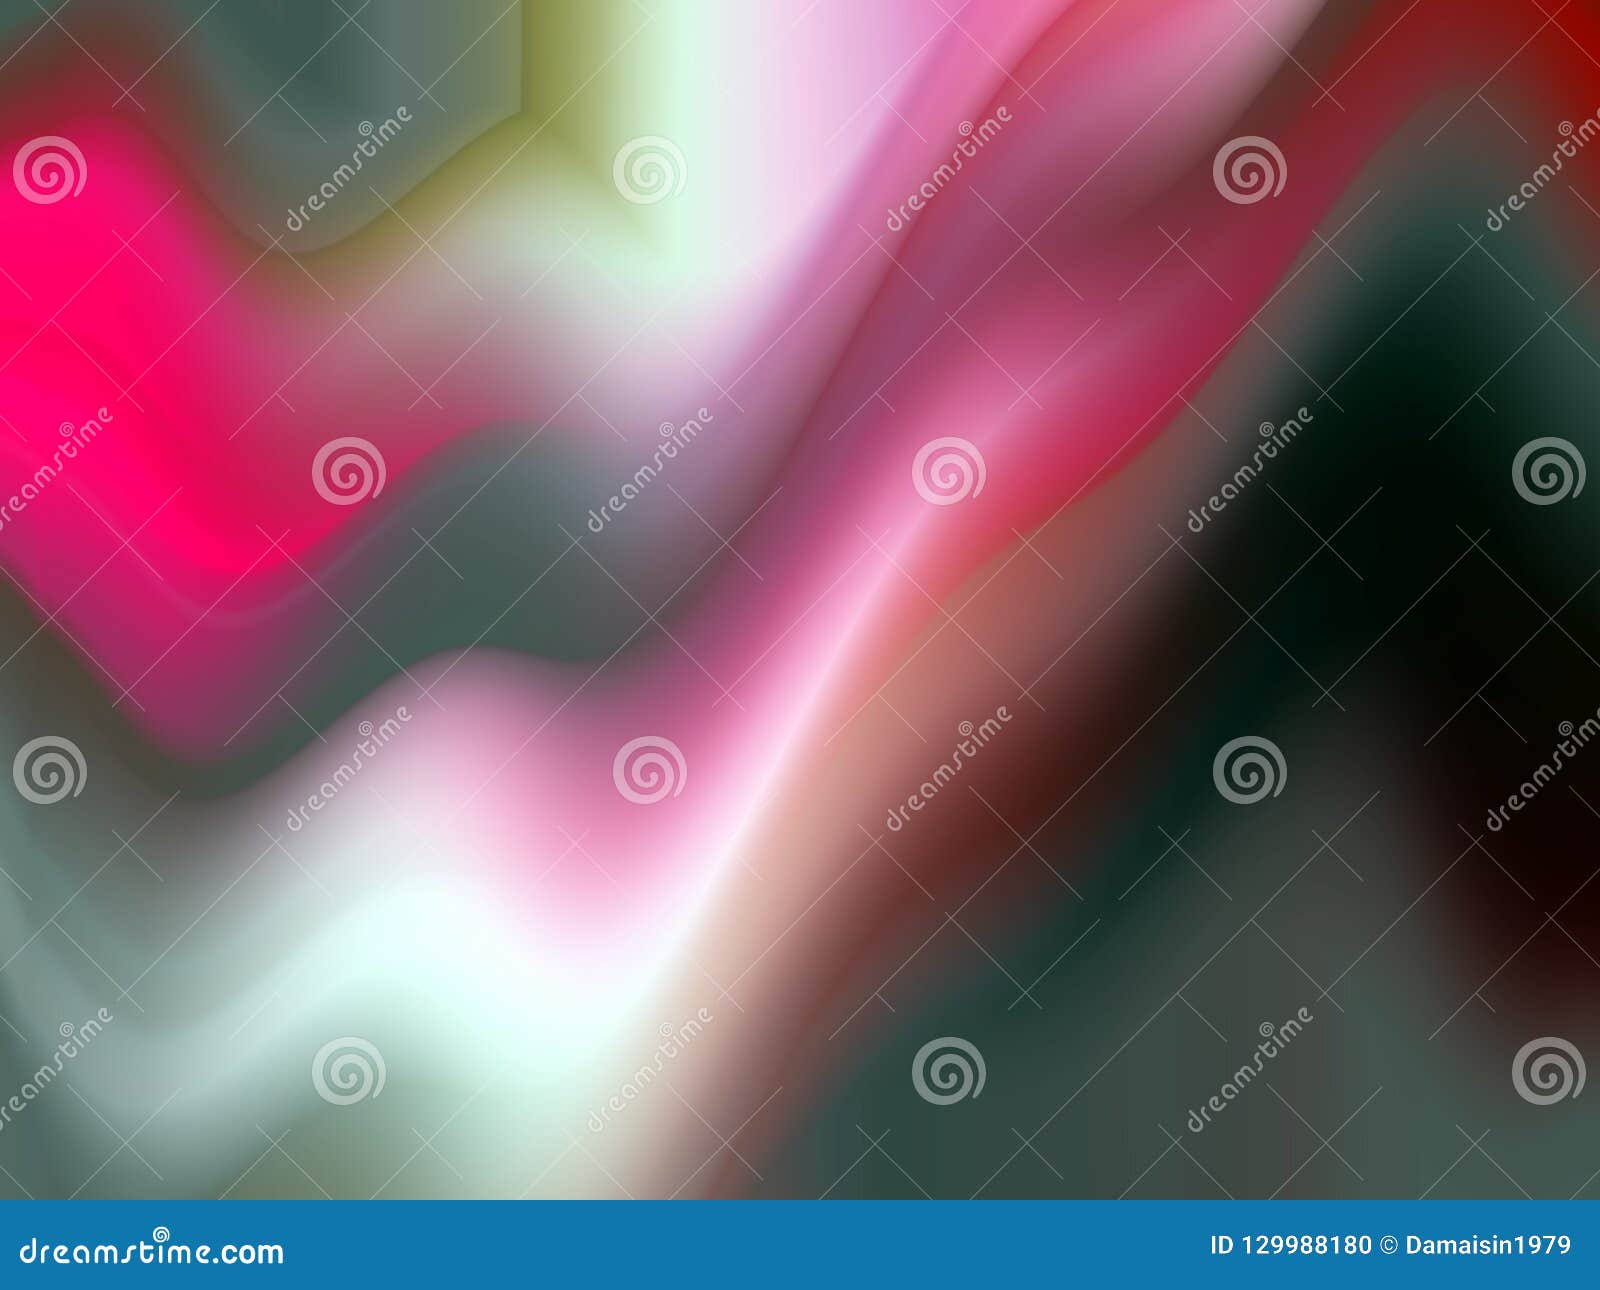 pink dark blurred soft shades, geometries, lines background, abstract colorful geometries